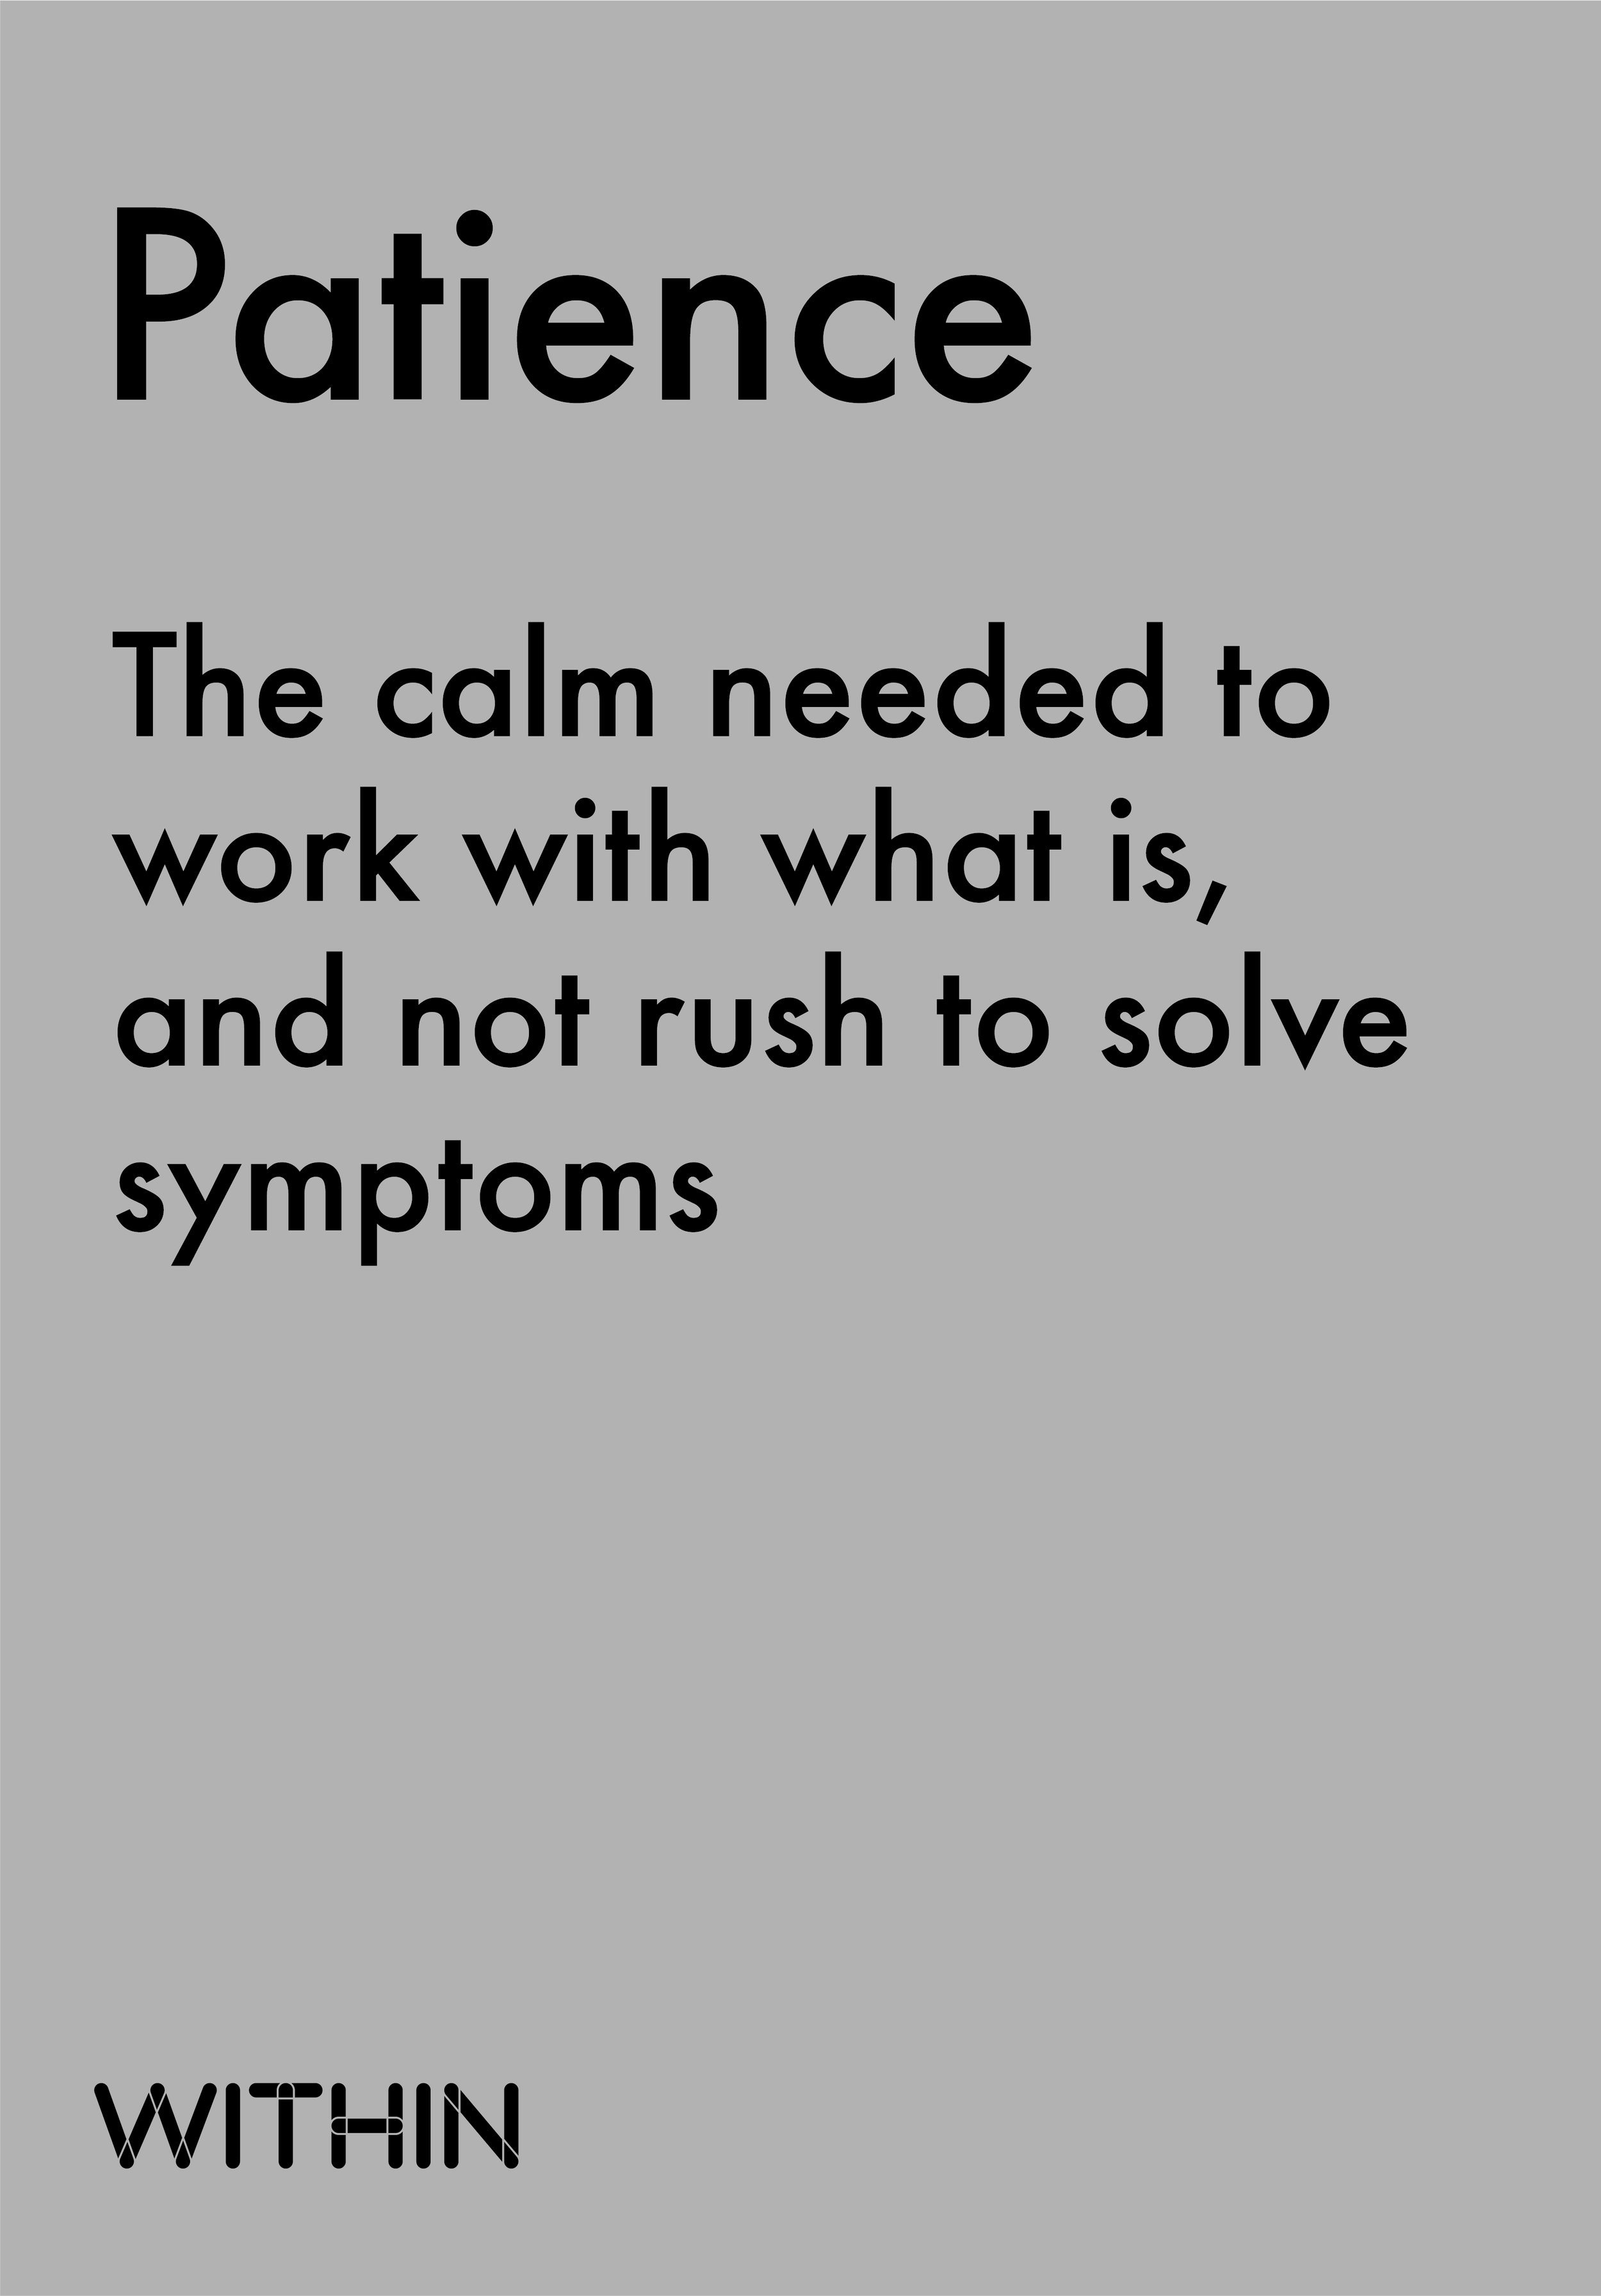 Human-Centred Leadership Values 7 Patience